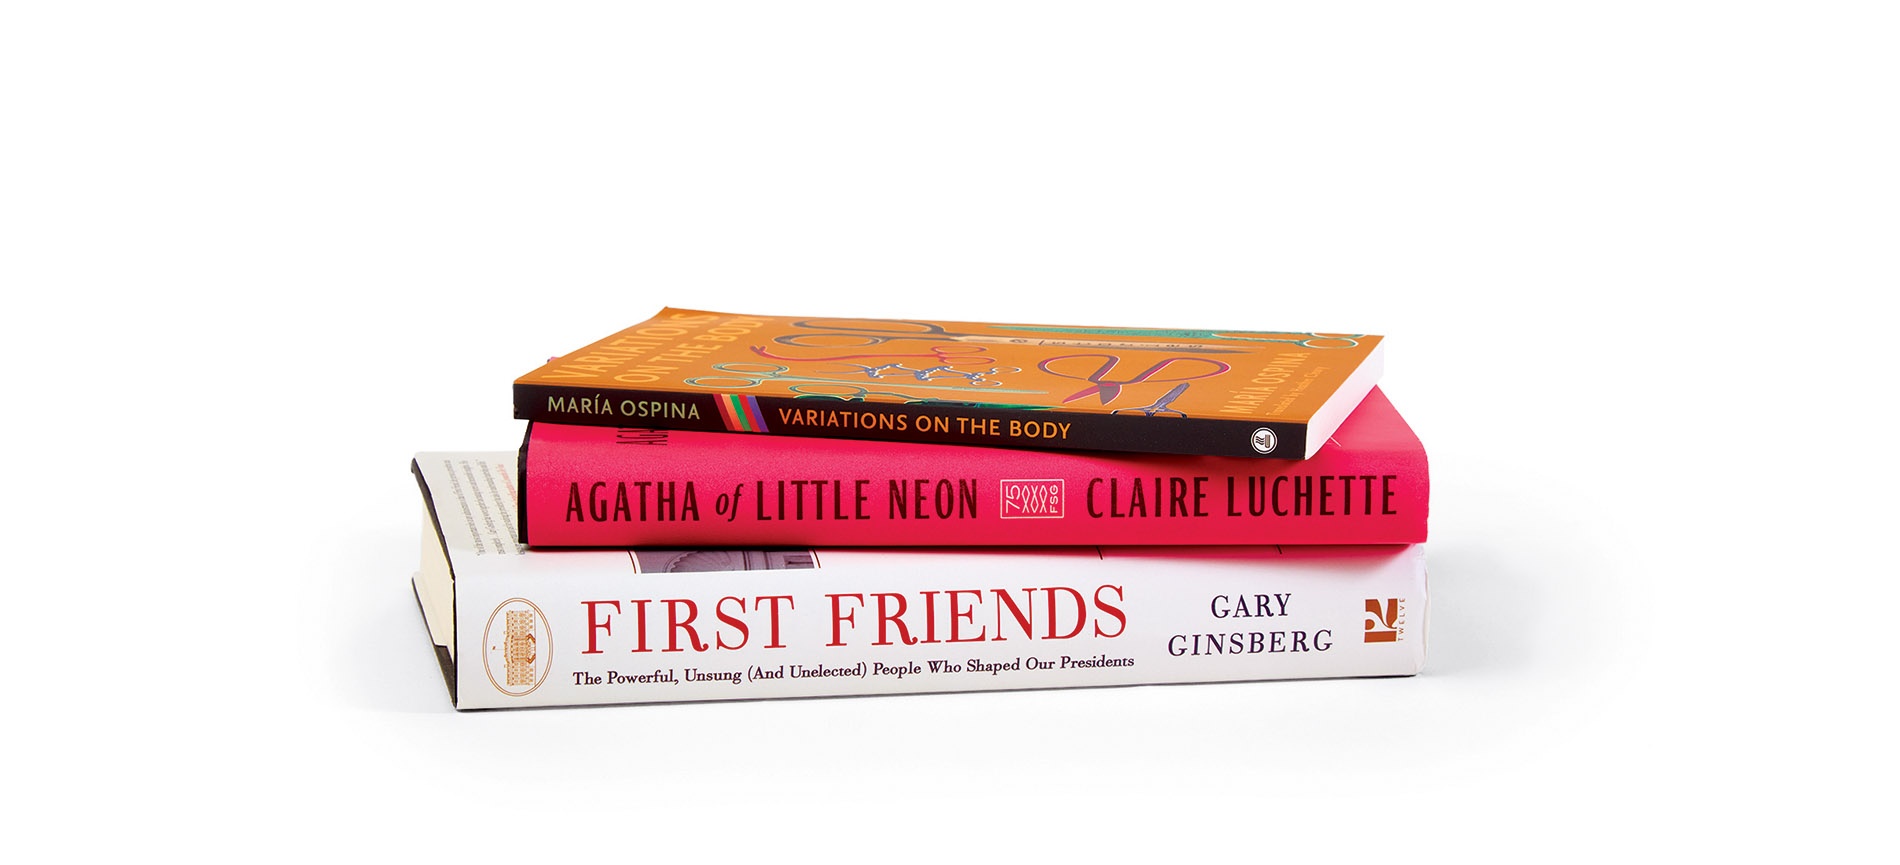 Books by Claire Luchette, Gary Ginsberg, and Maria Ospina